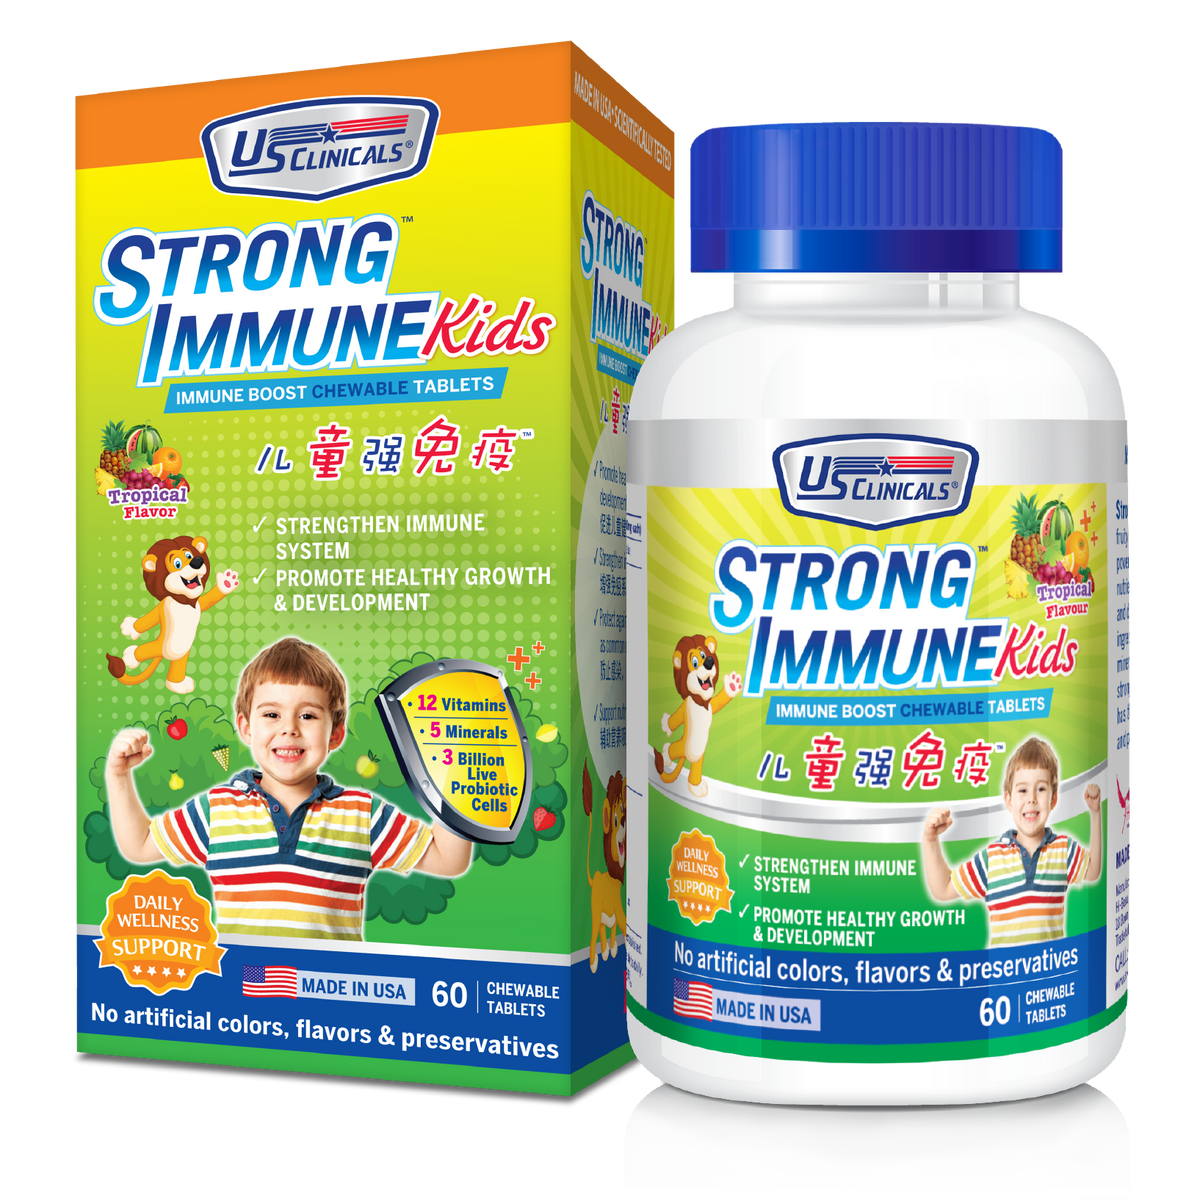 To enhance your child's immune system